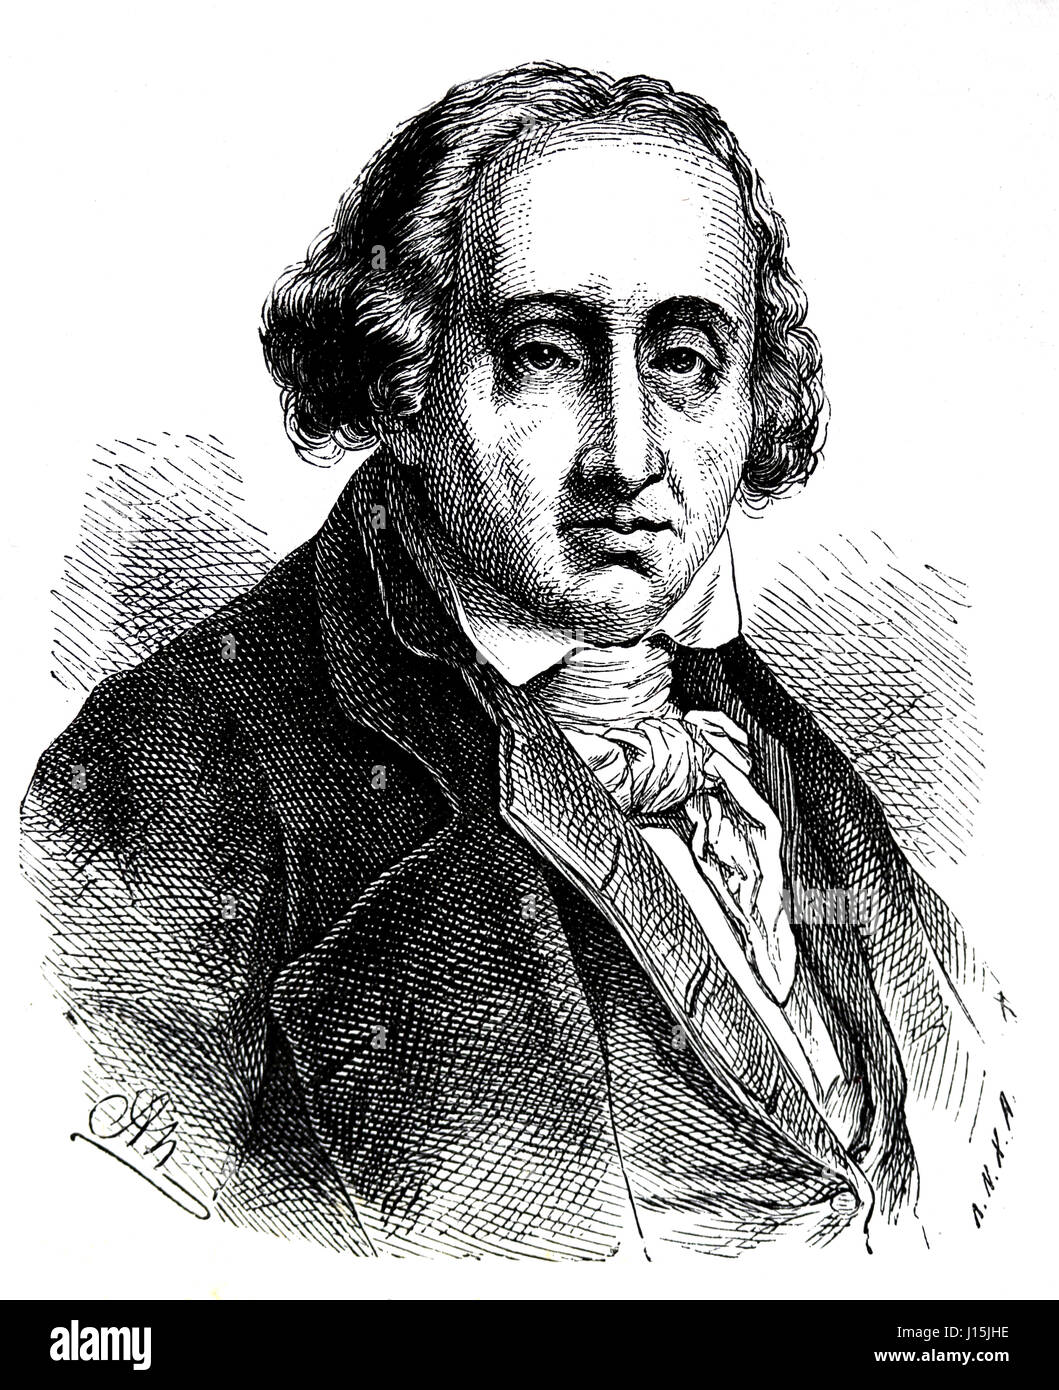 Joseph Maria Jacquard (1752-1834). French merchant. Inventor of programmable loom.  Engraving, Nuestro Siglo, 1883. Stock Photo